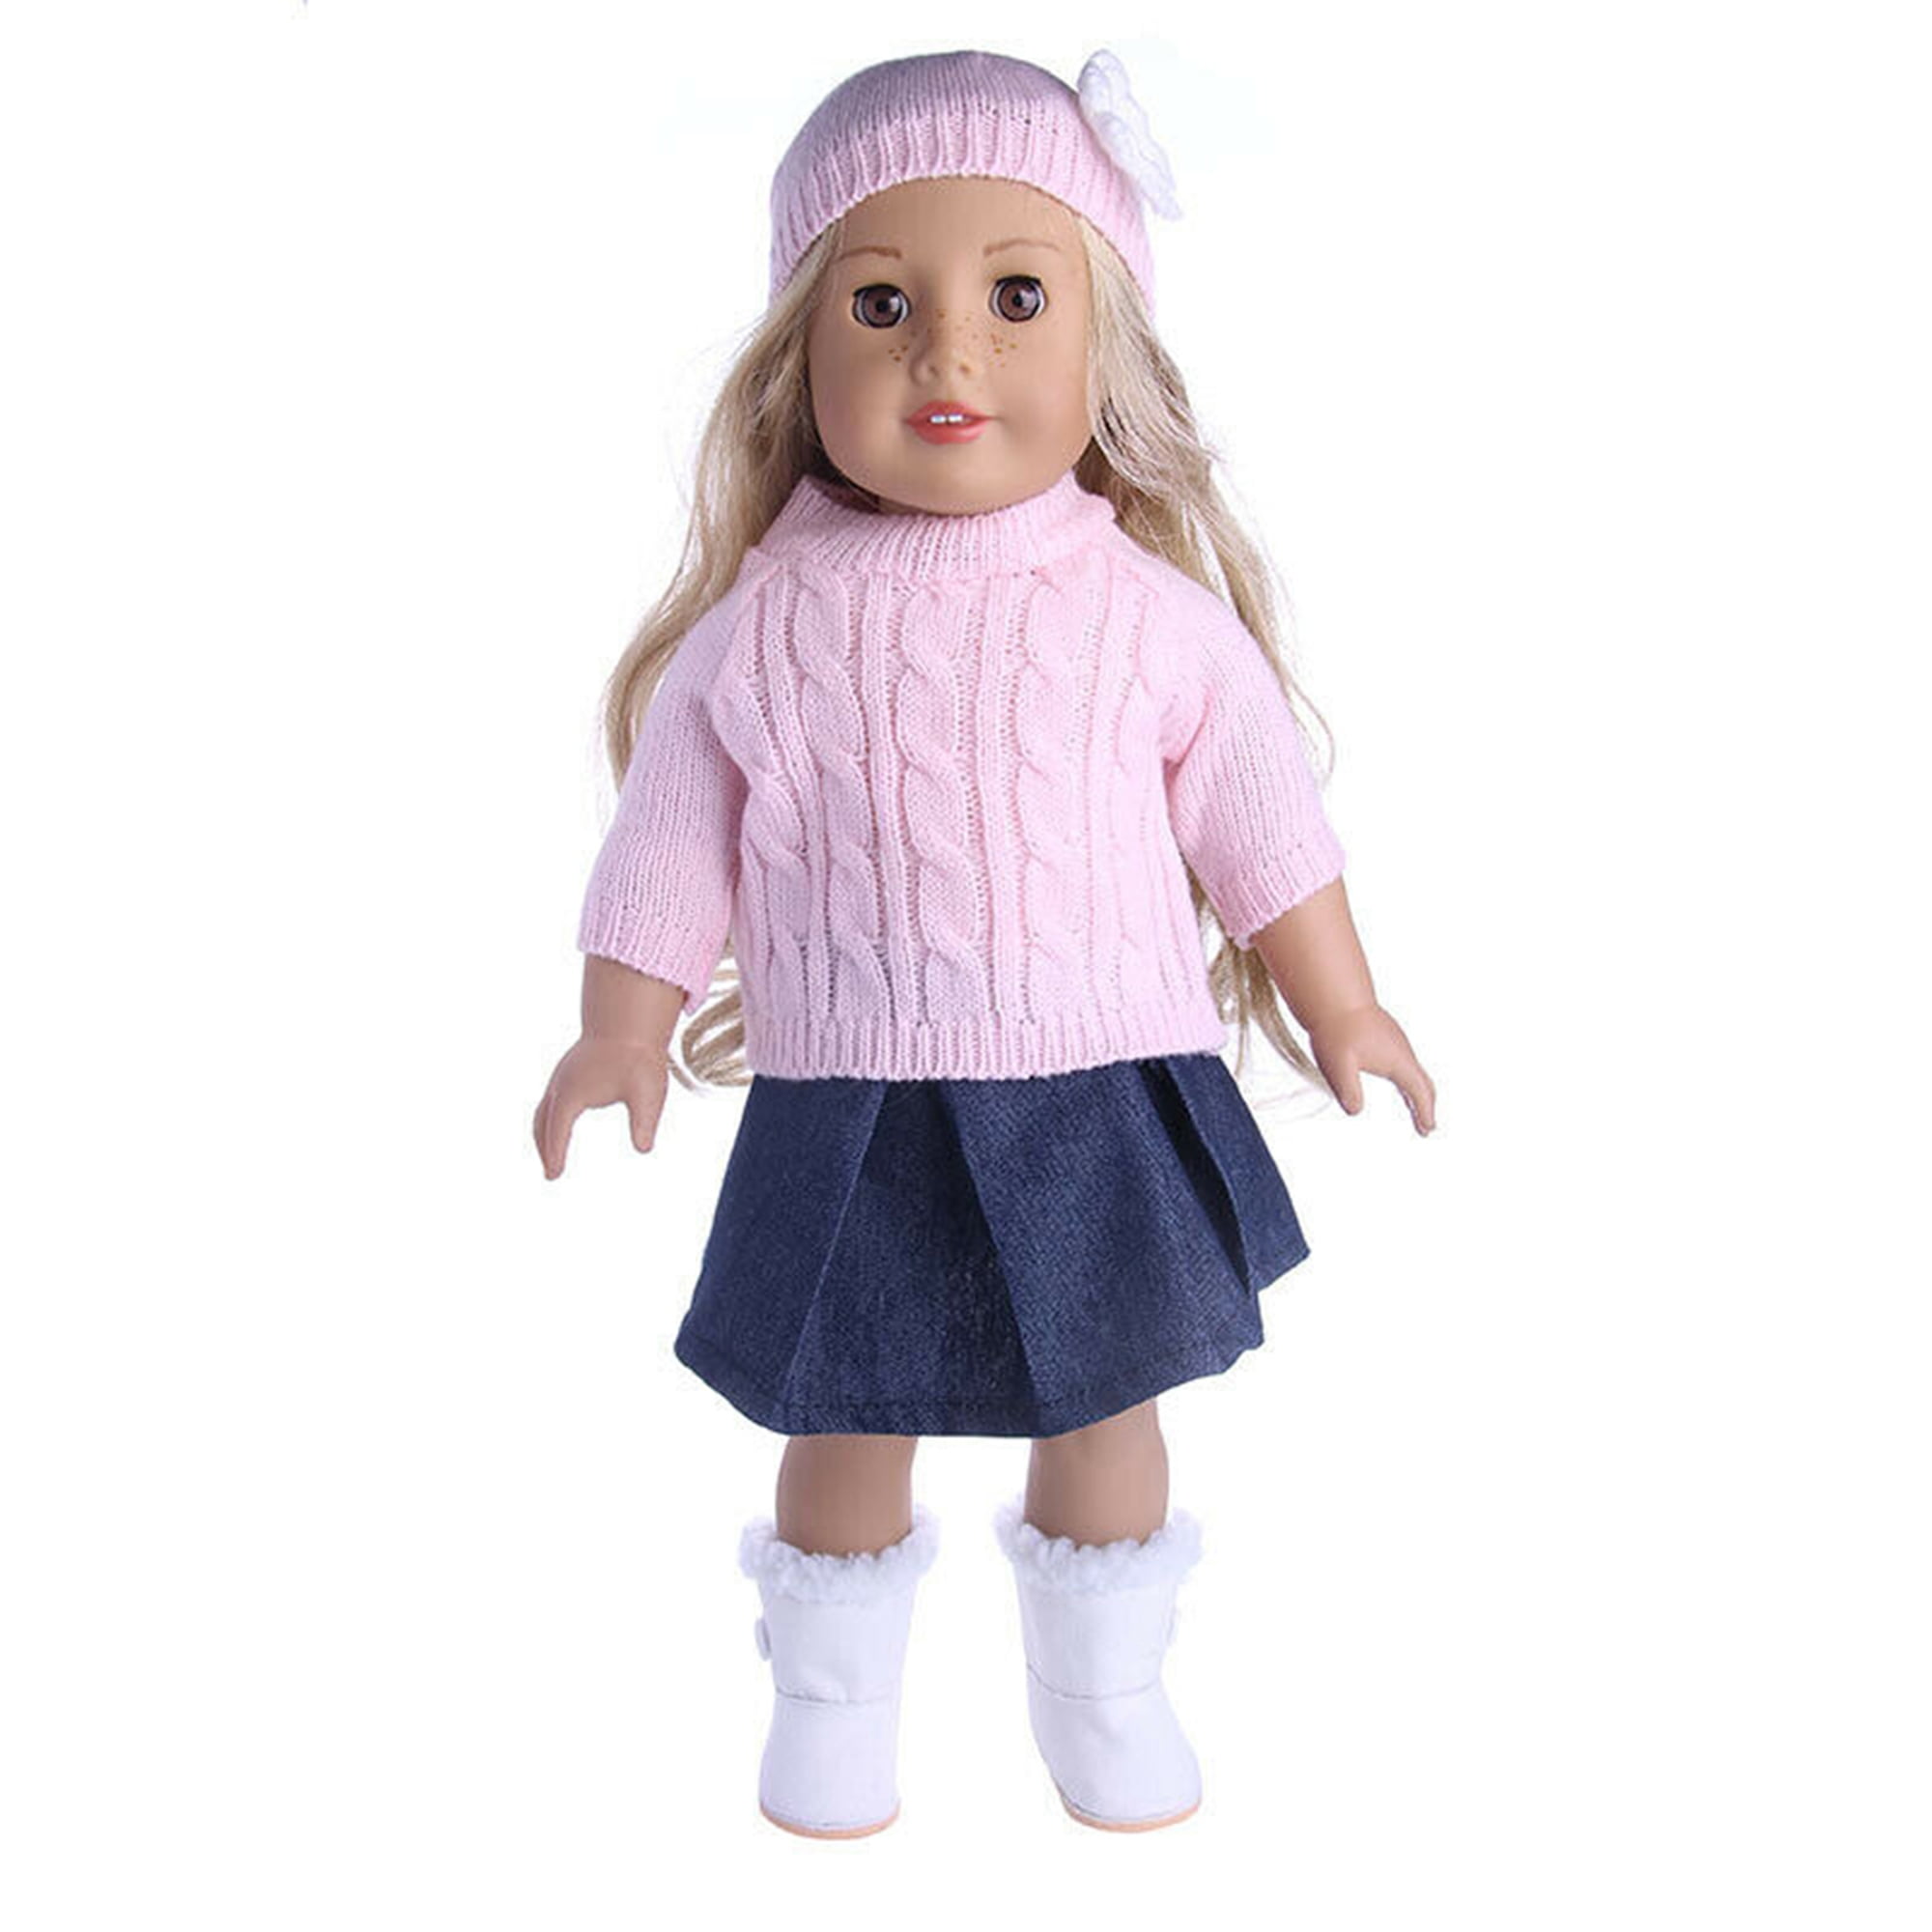 GuliriFei 18'' American Girl Outfit Dress Clothes Our Generation